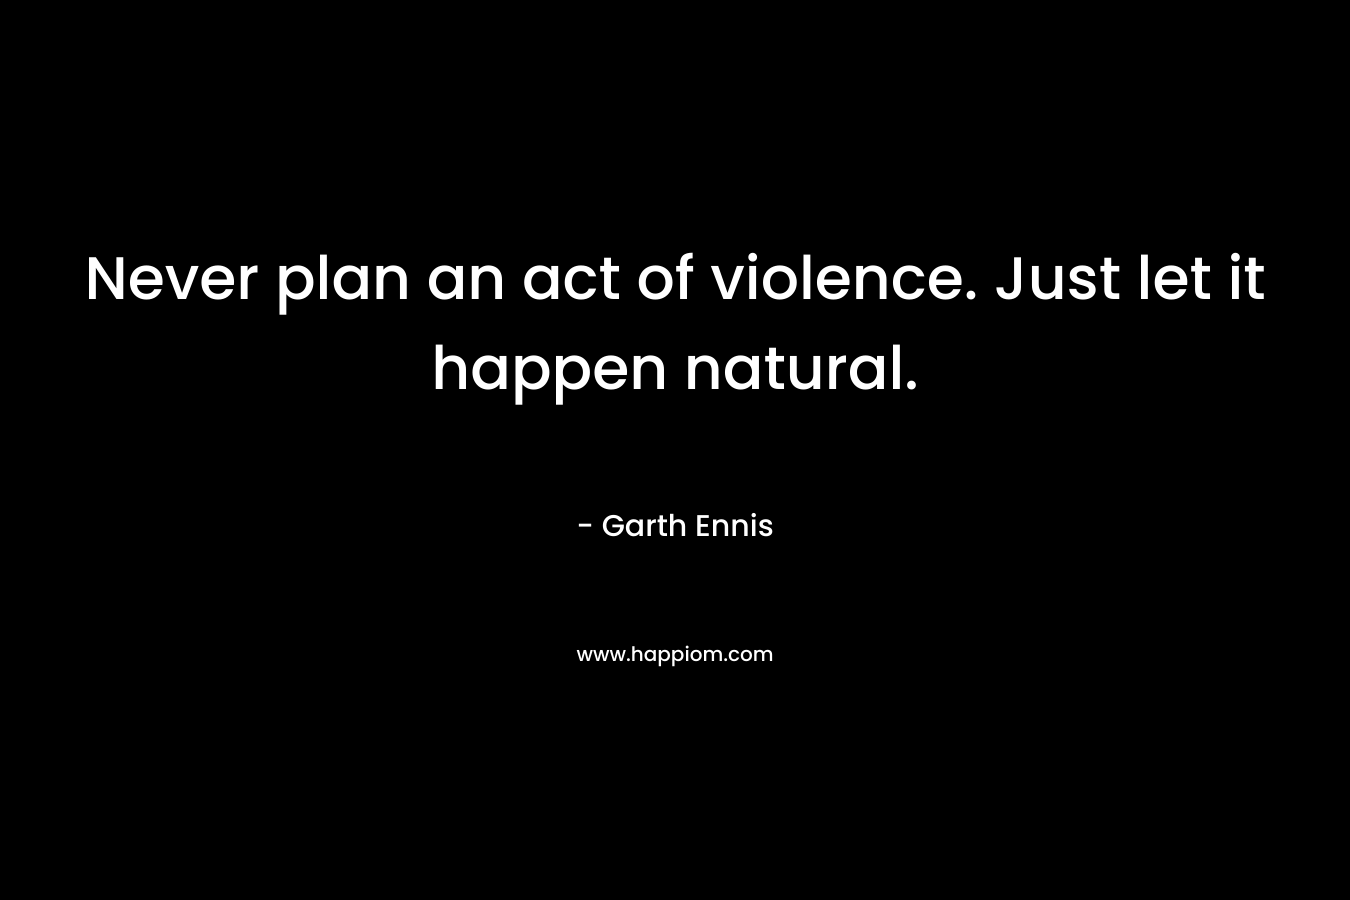 Never plan an act of violence. Just let it happen natural. – Garth Ennis